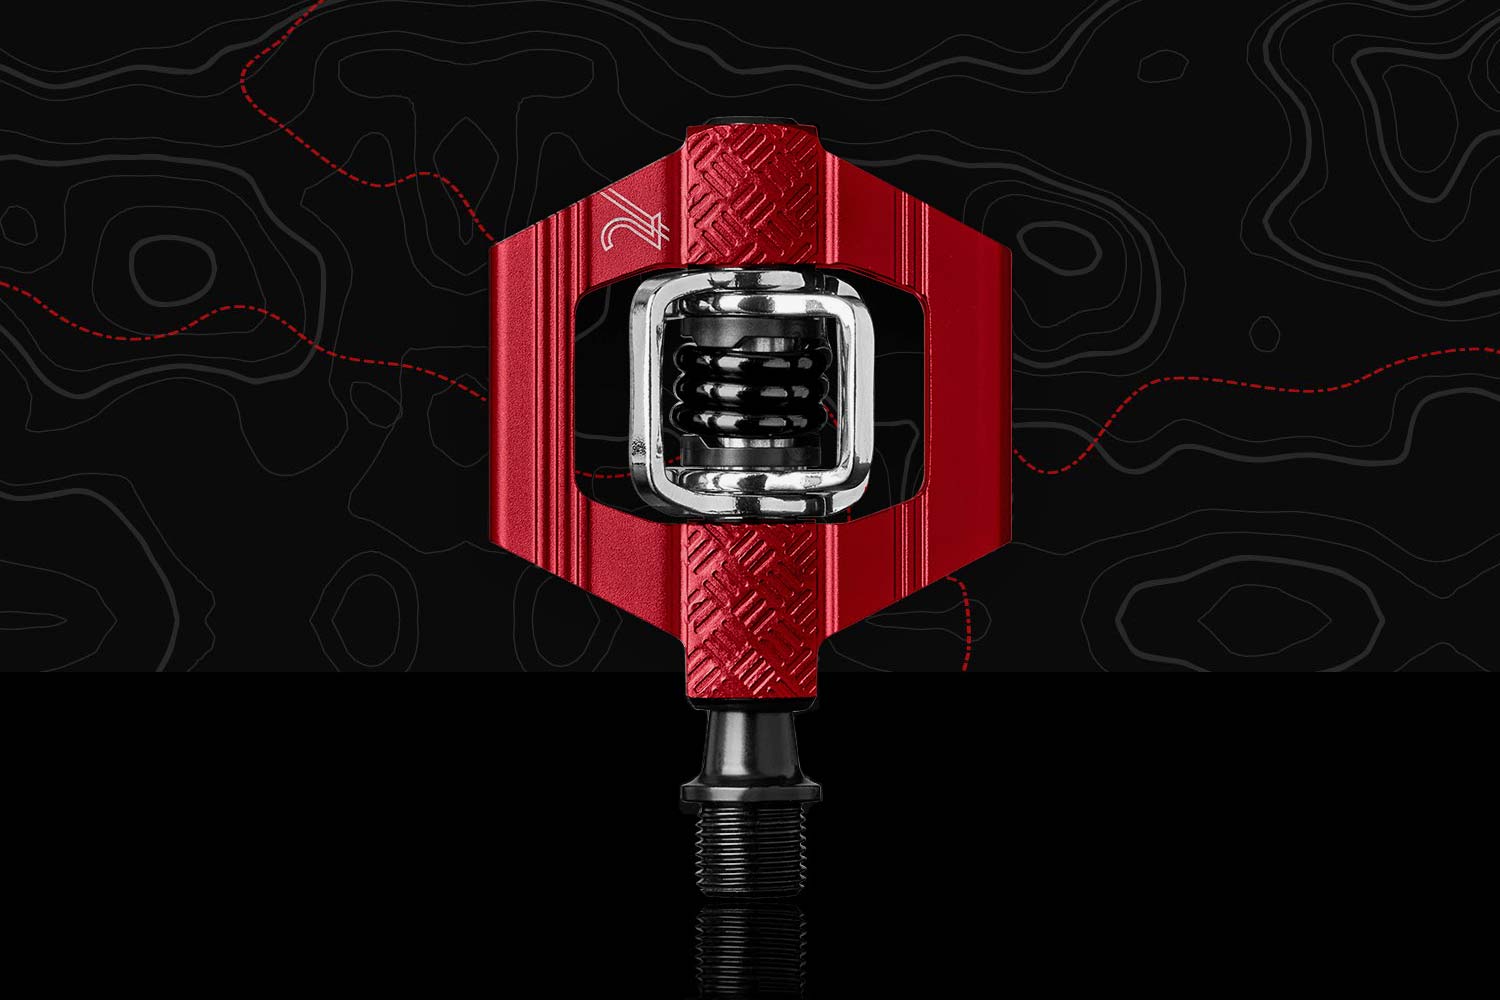 Crankbrothers gives away new Candy 2 Red pedals for easy access on 